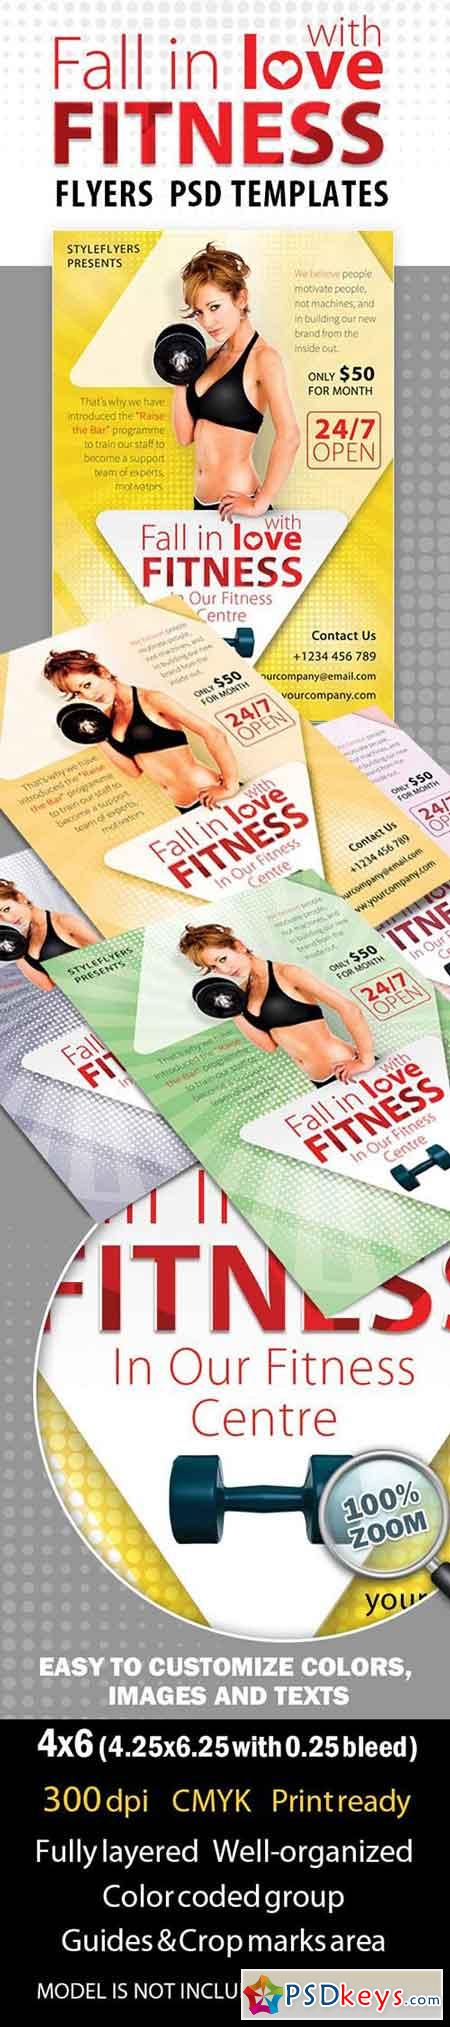 Fitness Love Flyer PSD Template + Facebook Cover